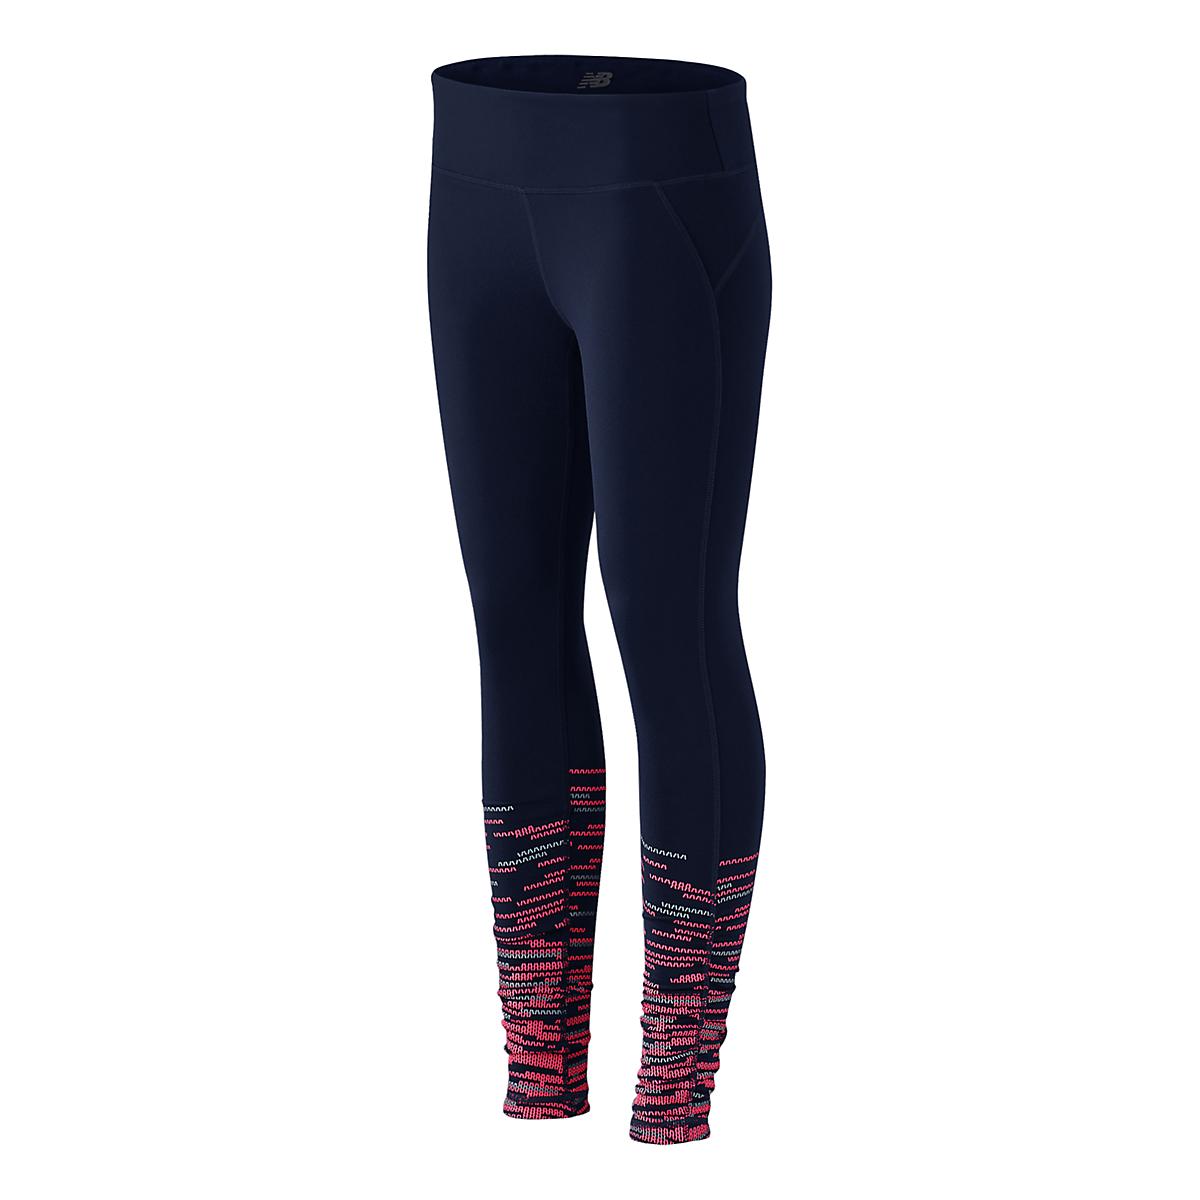 Premium Performance Printed Fitted Full Length Tights at Road Runner Sports